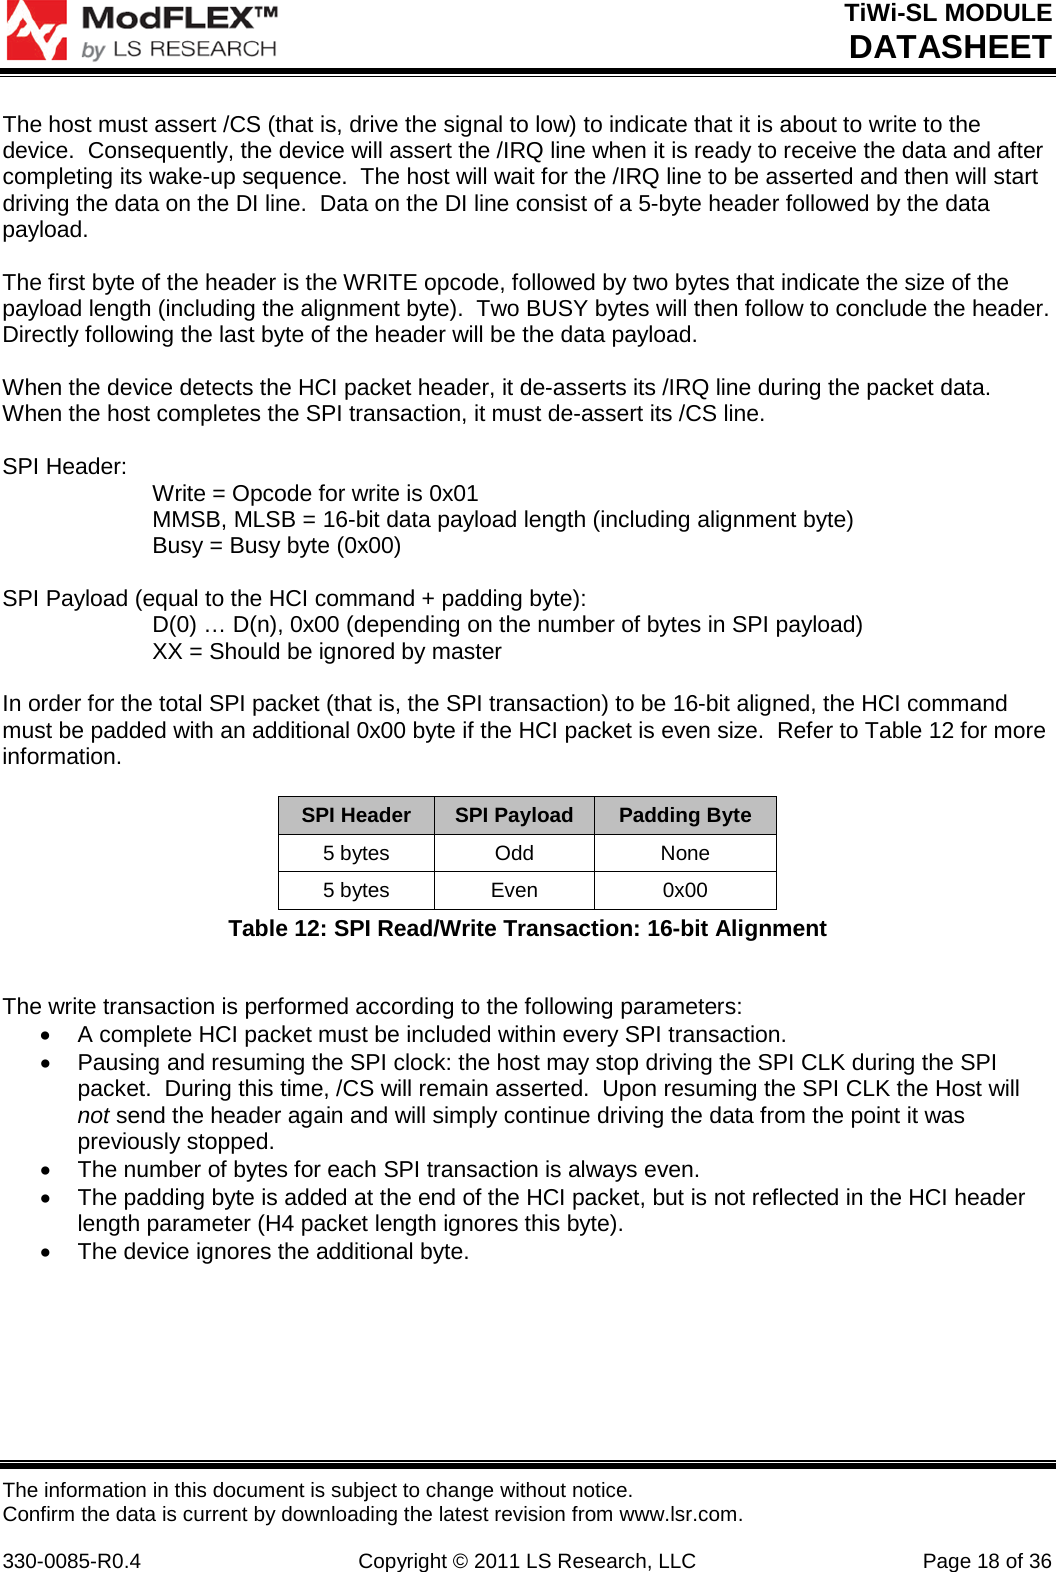 TiWi-SL MODULE DATASHEET The information in this document is subject to change without notice. Confirm the data is current by downloading the latest revision from www.lsr.com.  330-0085-R0.4 Copyright © 2011 LS Research, LLC Page 18 of 36 The host must assert /CS (that is, drive the signal to low) to indicate that it is about to write to the device.  Consequently, the device will assert the /IRQ line when it is ready to receive the data and after completing its wake-up sequence.  The host will wait for the /IRQ line to be asserted and then will start driving the data on the DI line.  Data on the DI line consist of a 5-byte header followed by the data payload.  The first byte of the header is the WRITE opcode, followed by two bytes that indicate the size of the payload length (including the alignment byte).  Two BUSY bytes will then follow to conclude the header. Directly following the last byte of the header will be the data payload.  When the device detects the HCI packet header, it de-asserts its /IRQ line during the packet data.  When the host completes the SPI transaction, it must de-assert its /CS line.  SPI Header: Write = Opcode for write is 0x01 MMSB, MLSB = 16-bit data payload length (including alignment byte) Busy = Busy byte (0x00)  SPI Payload (equal to the HCI command + padding byte): D(0) … D(n), 0x00 (depending on the number of bytes in SPI payload) XX = Should be ignored by master  In order for the total SPI packet (that is, the SPI transaction) to be 16-bit aligned, the HCI command must be padded with an additional 0x00 byte if the HCI packet is even size.  Refer to Table 12 for more information.  SPI Header SPI Payload Padding Byte 5 bytes Odd None 5 bytes Even 0x00 Table 12: SPI Read/Write Transaction: 16-bit Alignment  The write transaction is performed according to the following parameters: • A complete HCI packet must be included within every SPI transaction. • Pausing and resuming the SPI clock: the host may stop driving the SPI CLK during the SPI packet.  During this time, /CS will remain asserted.  Upon resuming the SPI CLK the Host will not send the header again and will simply continue driving the data from the point it was previously stopped. • The number of bytes for each SPI transaction is always even. • The padding byte is added at the end of the HCI packet, but is not reflected in the HCI header length parameter (H4 packet length ignores this byte). • The device ignores the additional byte.    